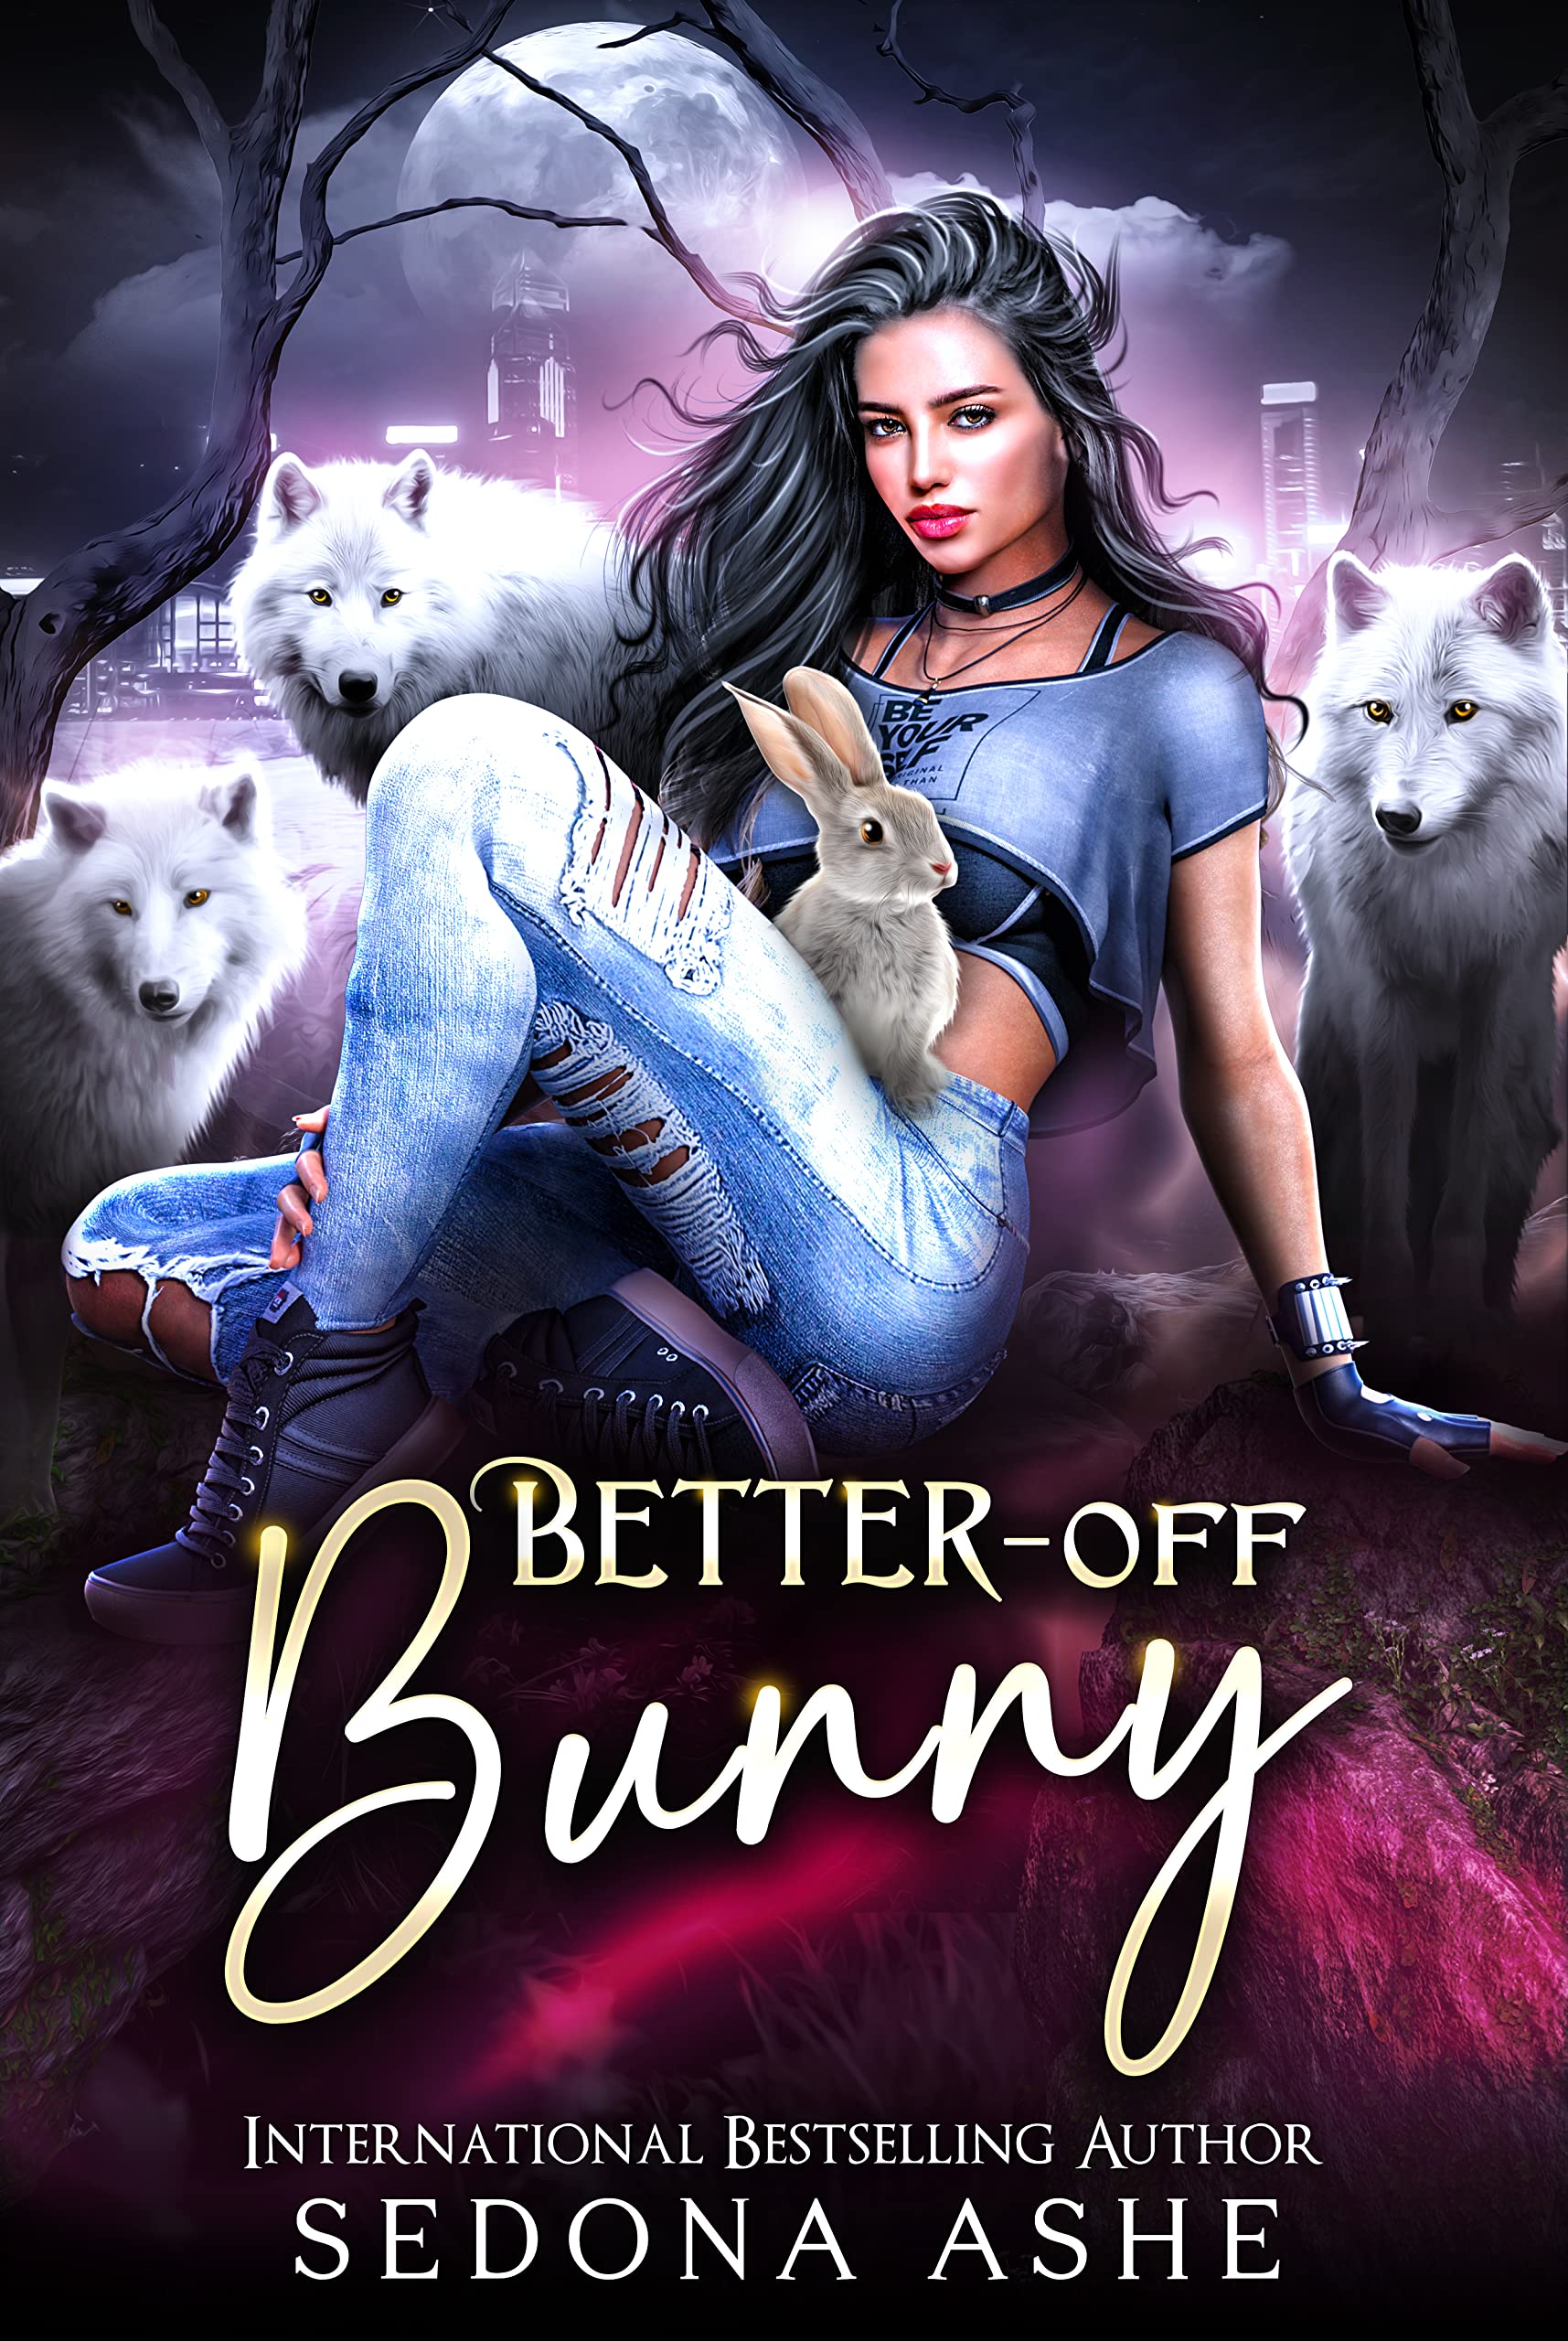 Better-Off Bunny by Sedona Ashe PDF Download Audio Book